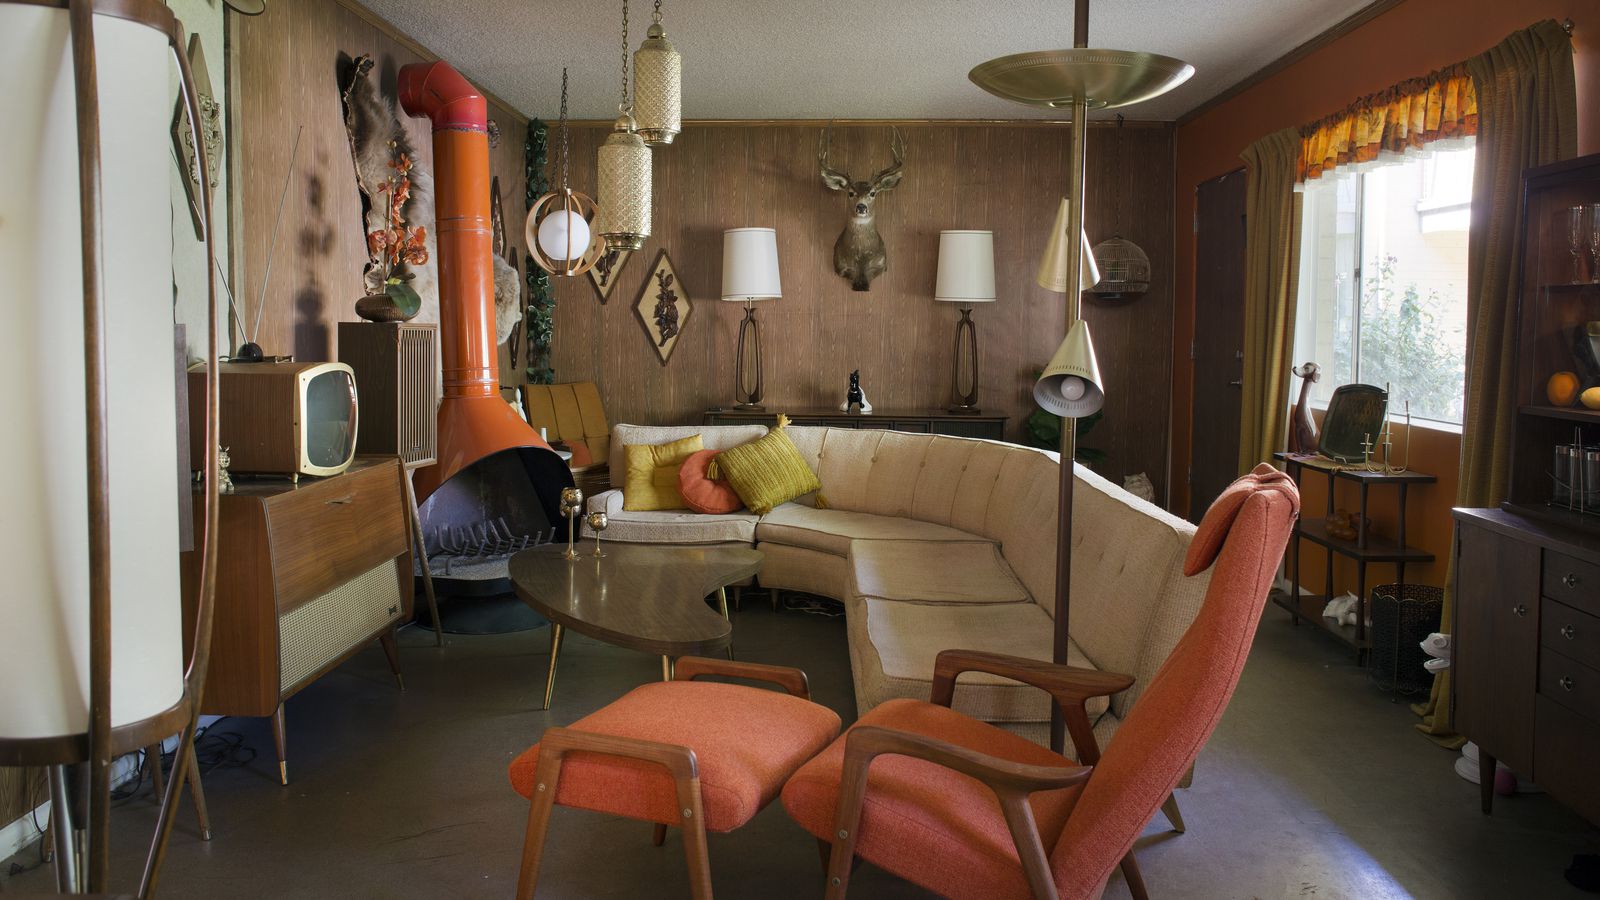 A Millennial in Love With Midcentury Modernism Creates Time Capsule